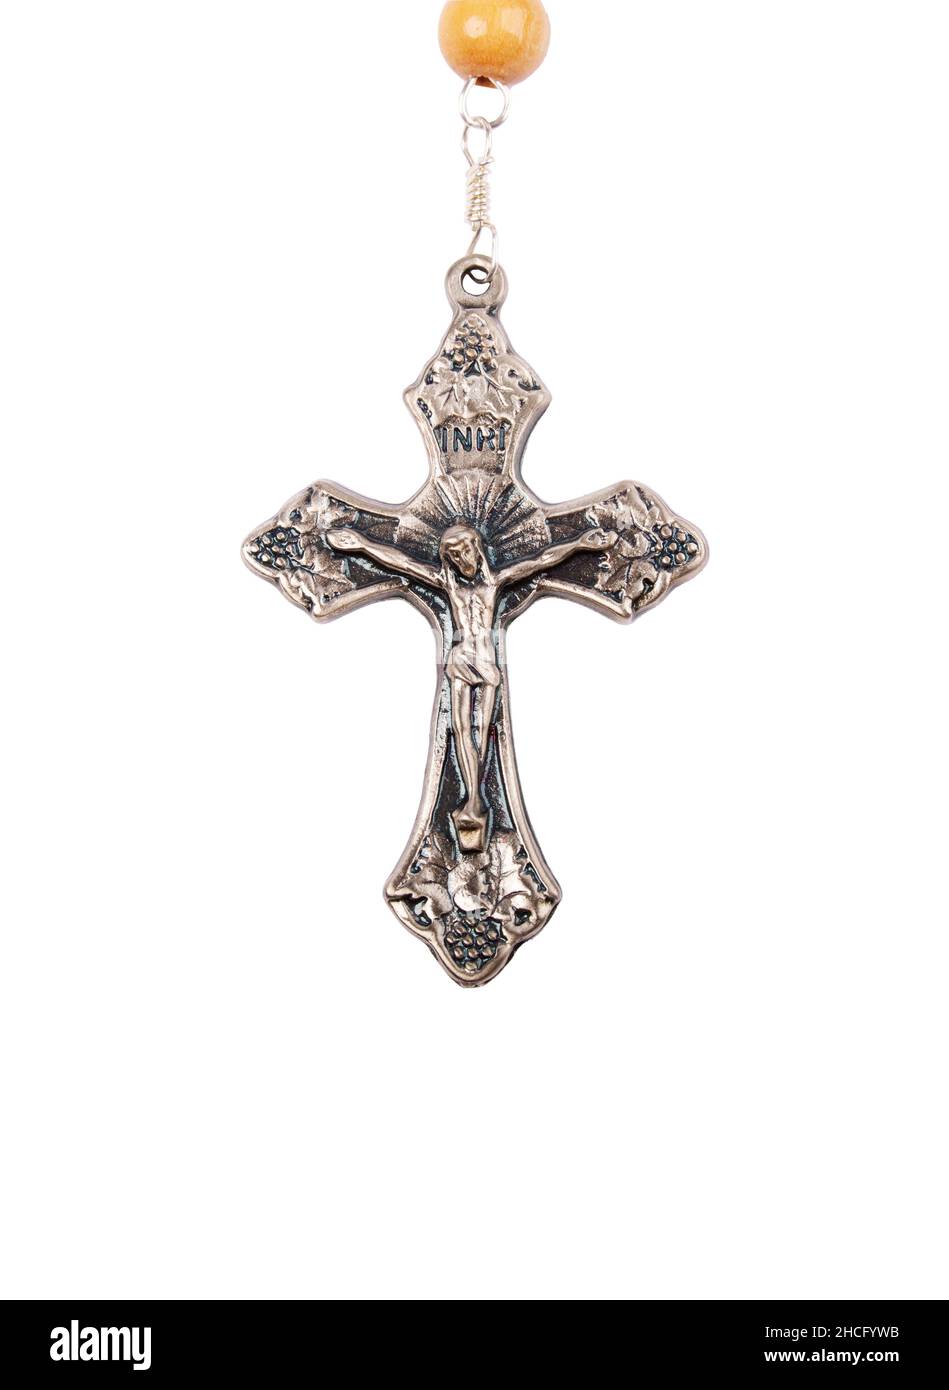 Silver crucifix close-up isolated on white background Stock Photo